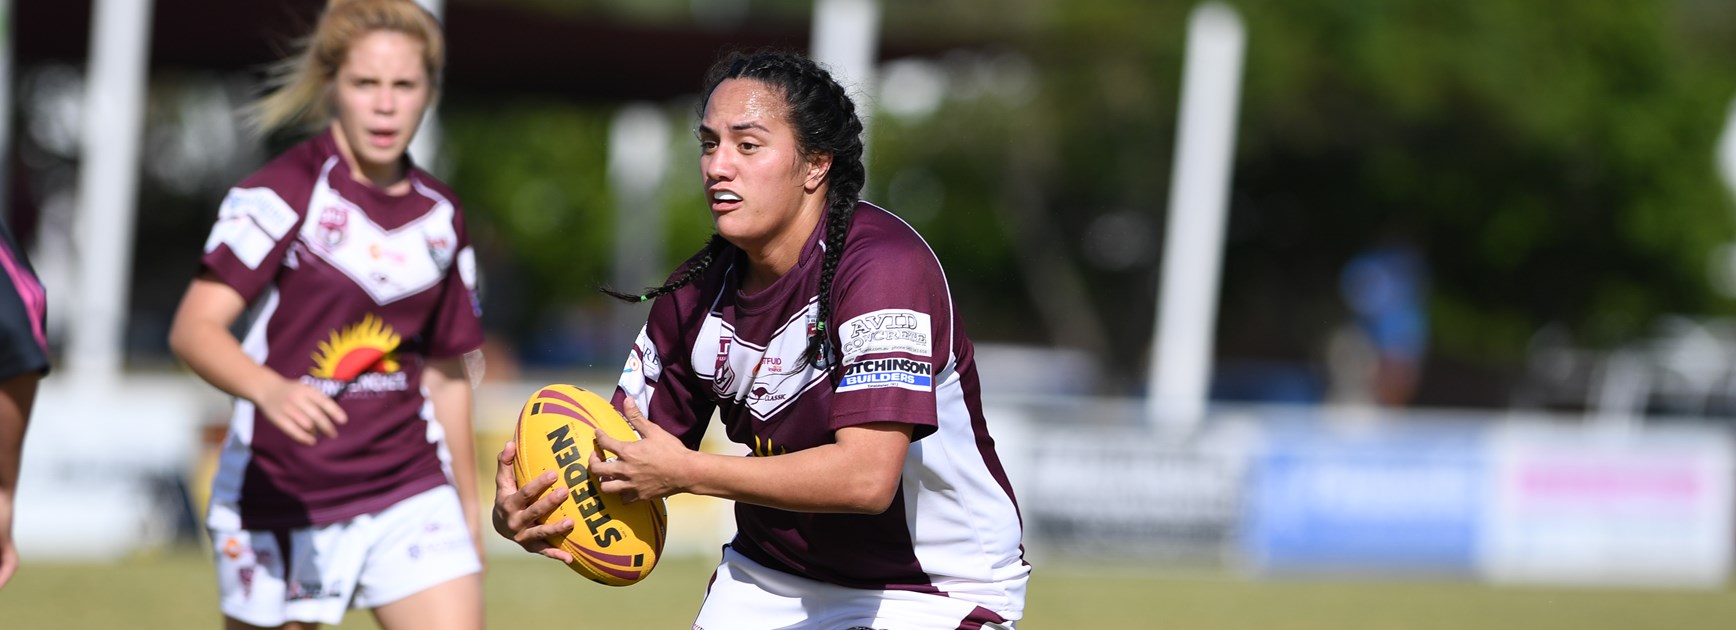 Bears and Panthers meet in televised women's grand final